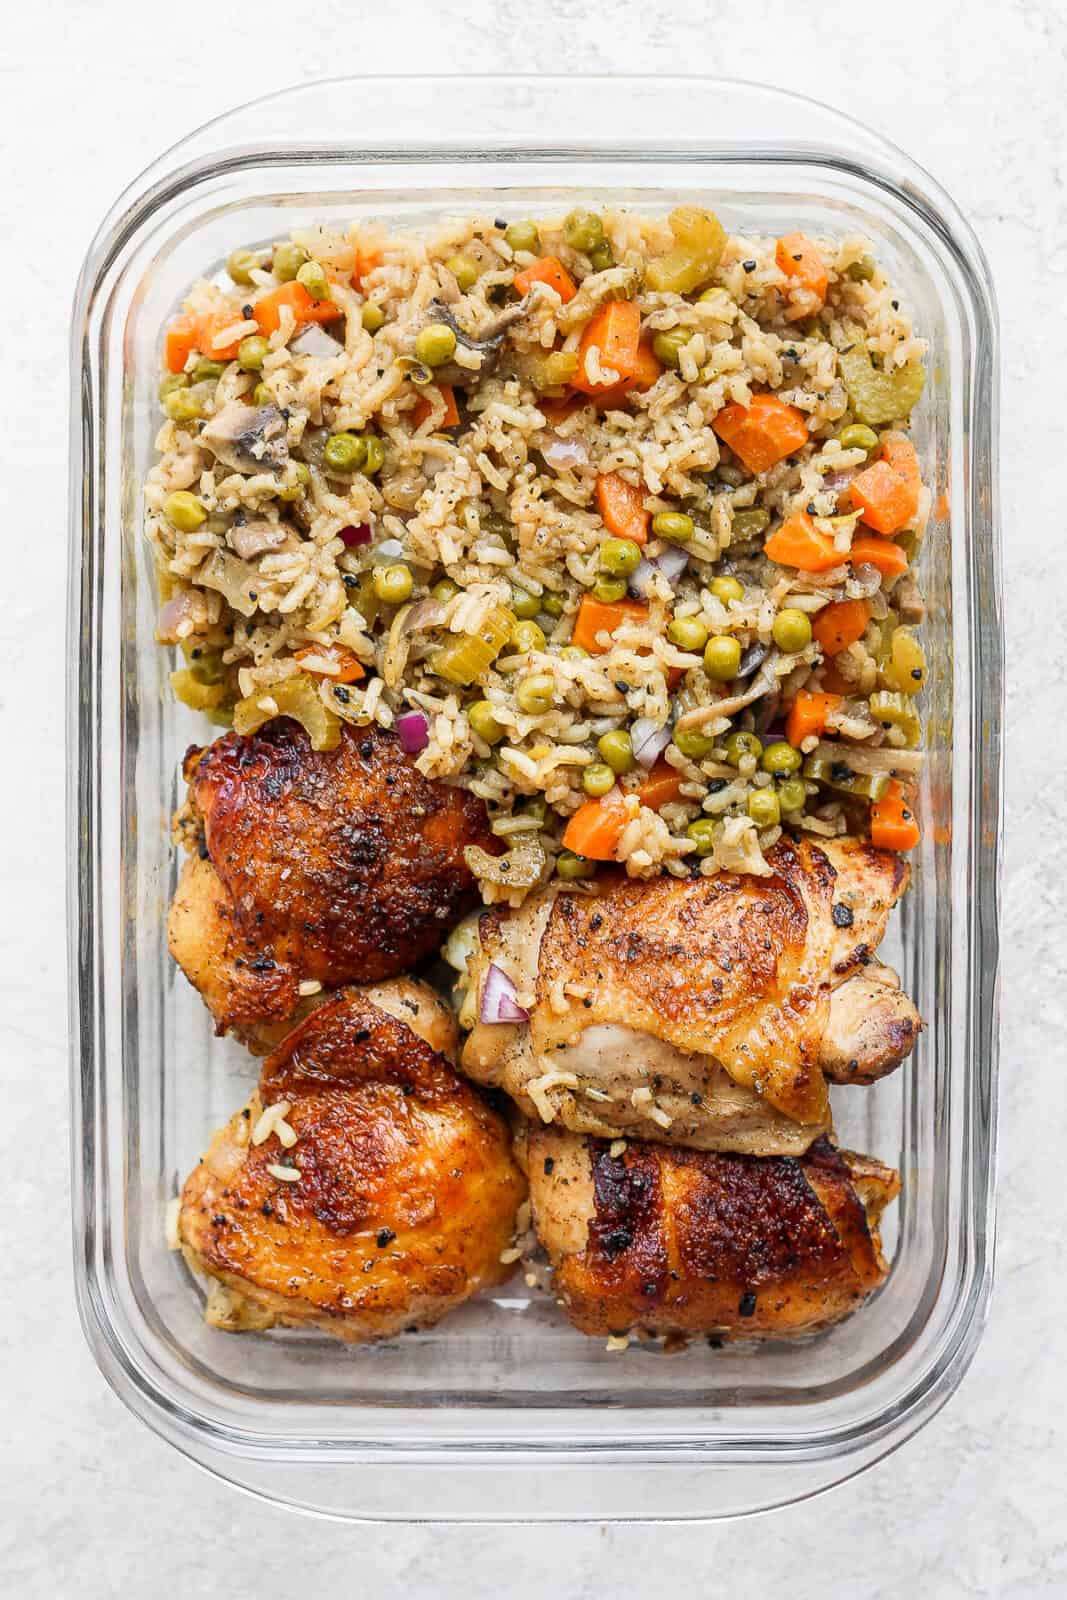 Baked chicken and rice in a storage container.